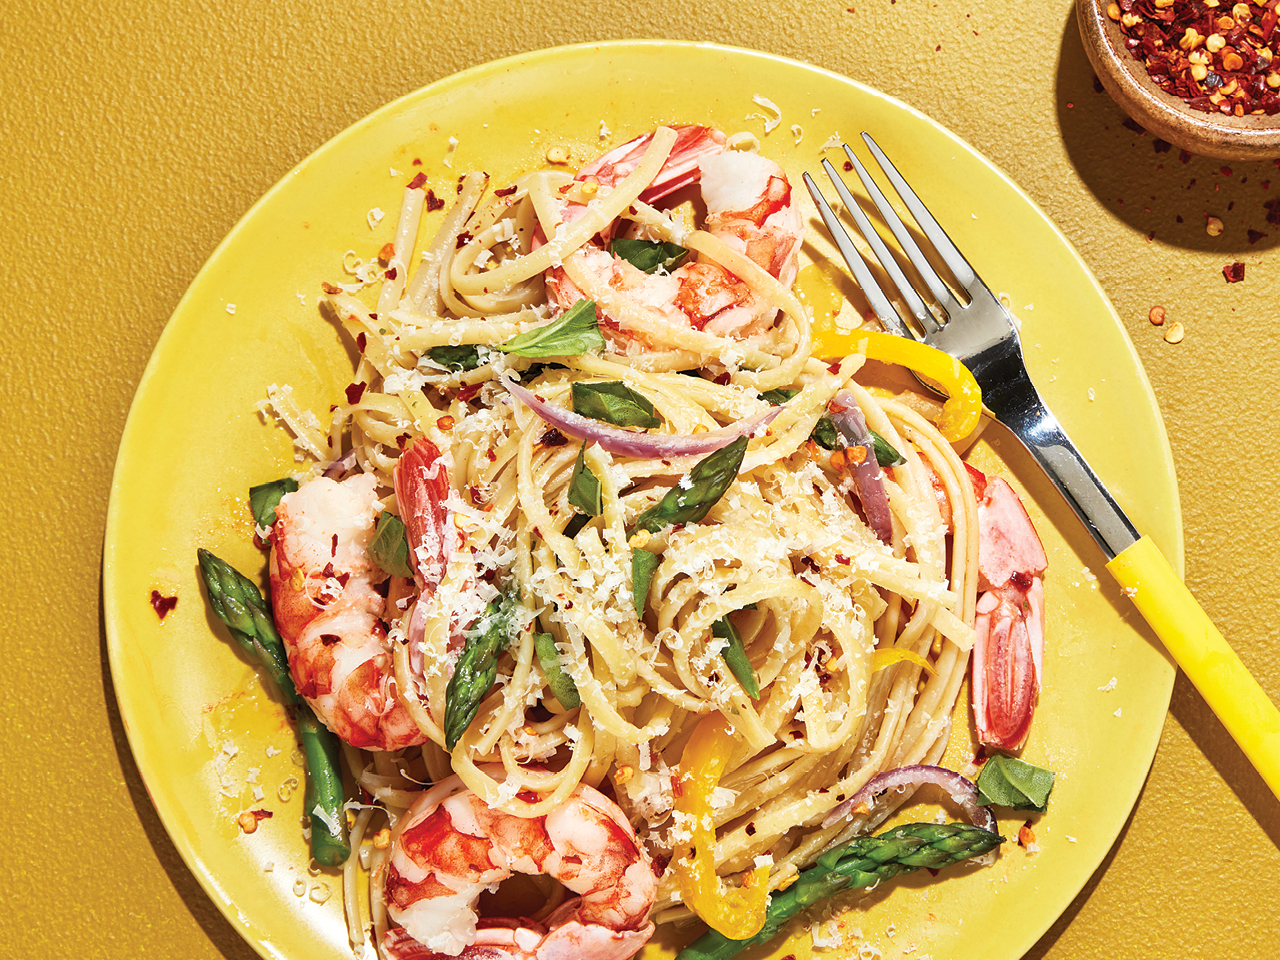 Pasta with shrimp and asparagus on yellow plate.